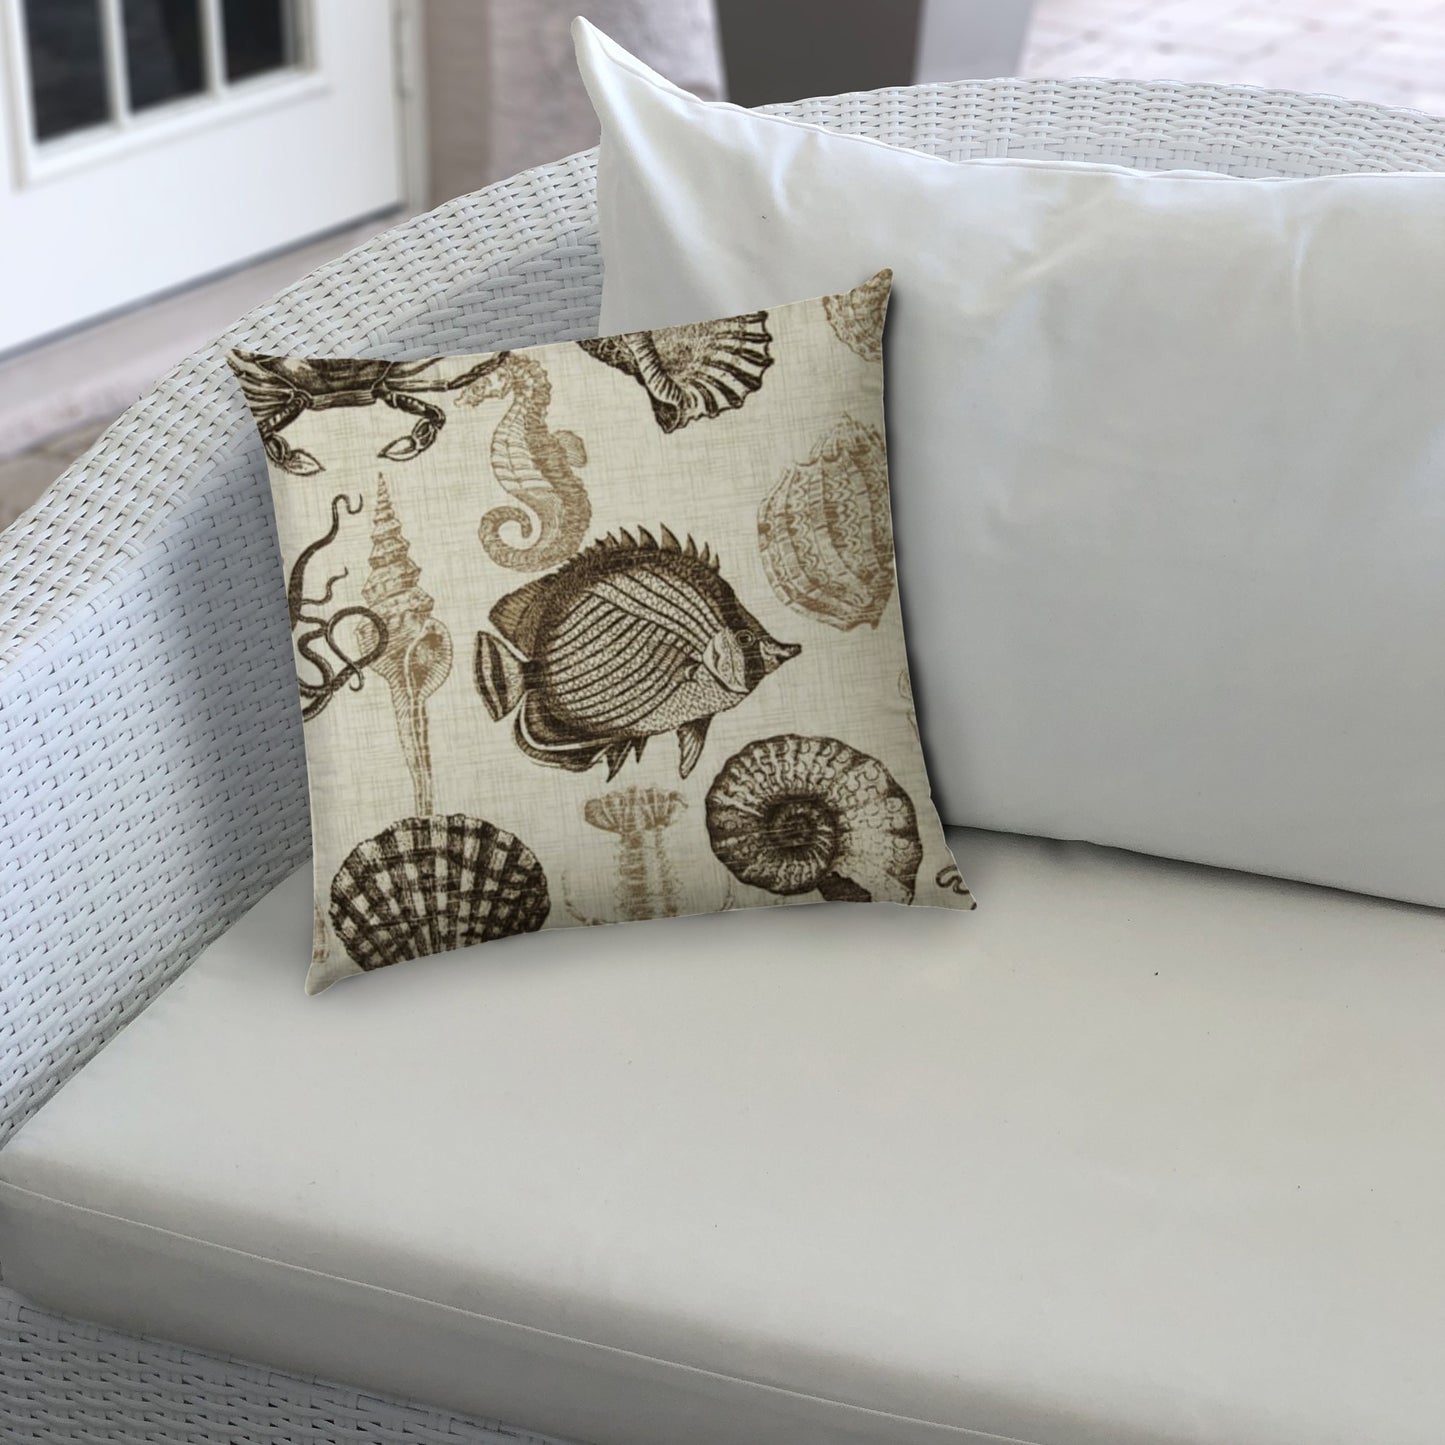 20" X 20" Brown And Natural Brown Fish Blown Seam Coastal Throw Indoor Outdoor Pillow